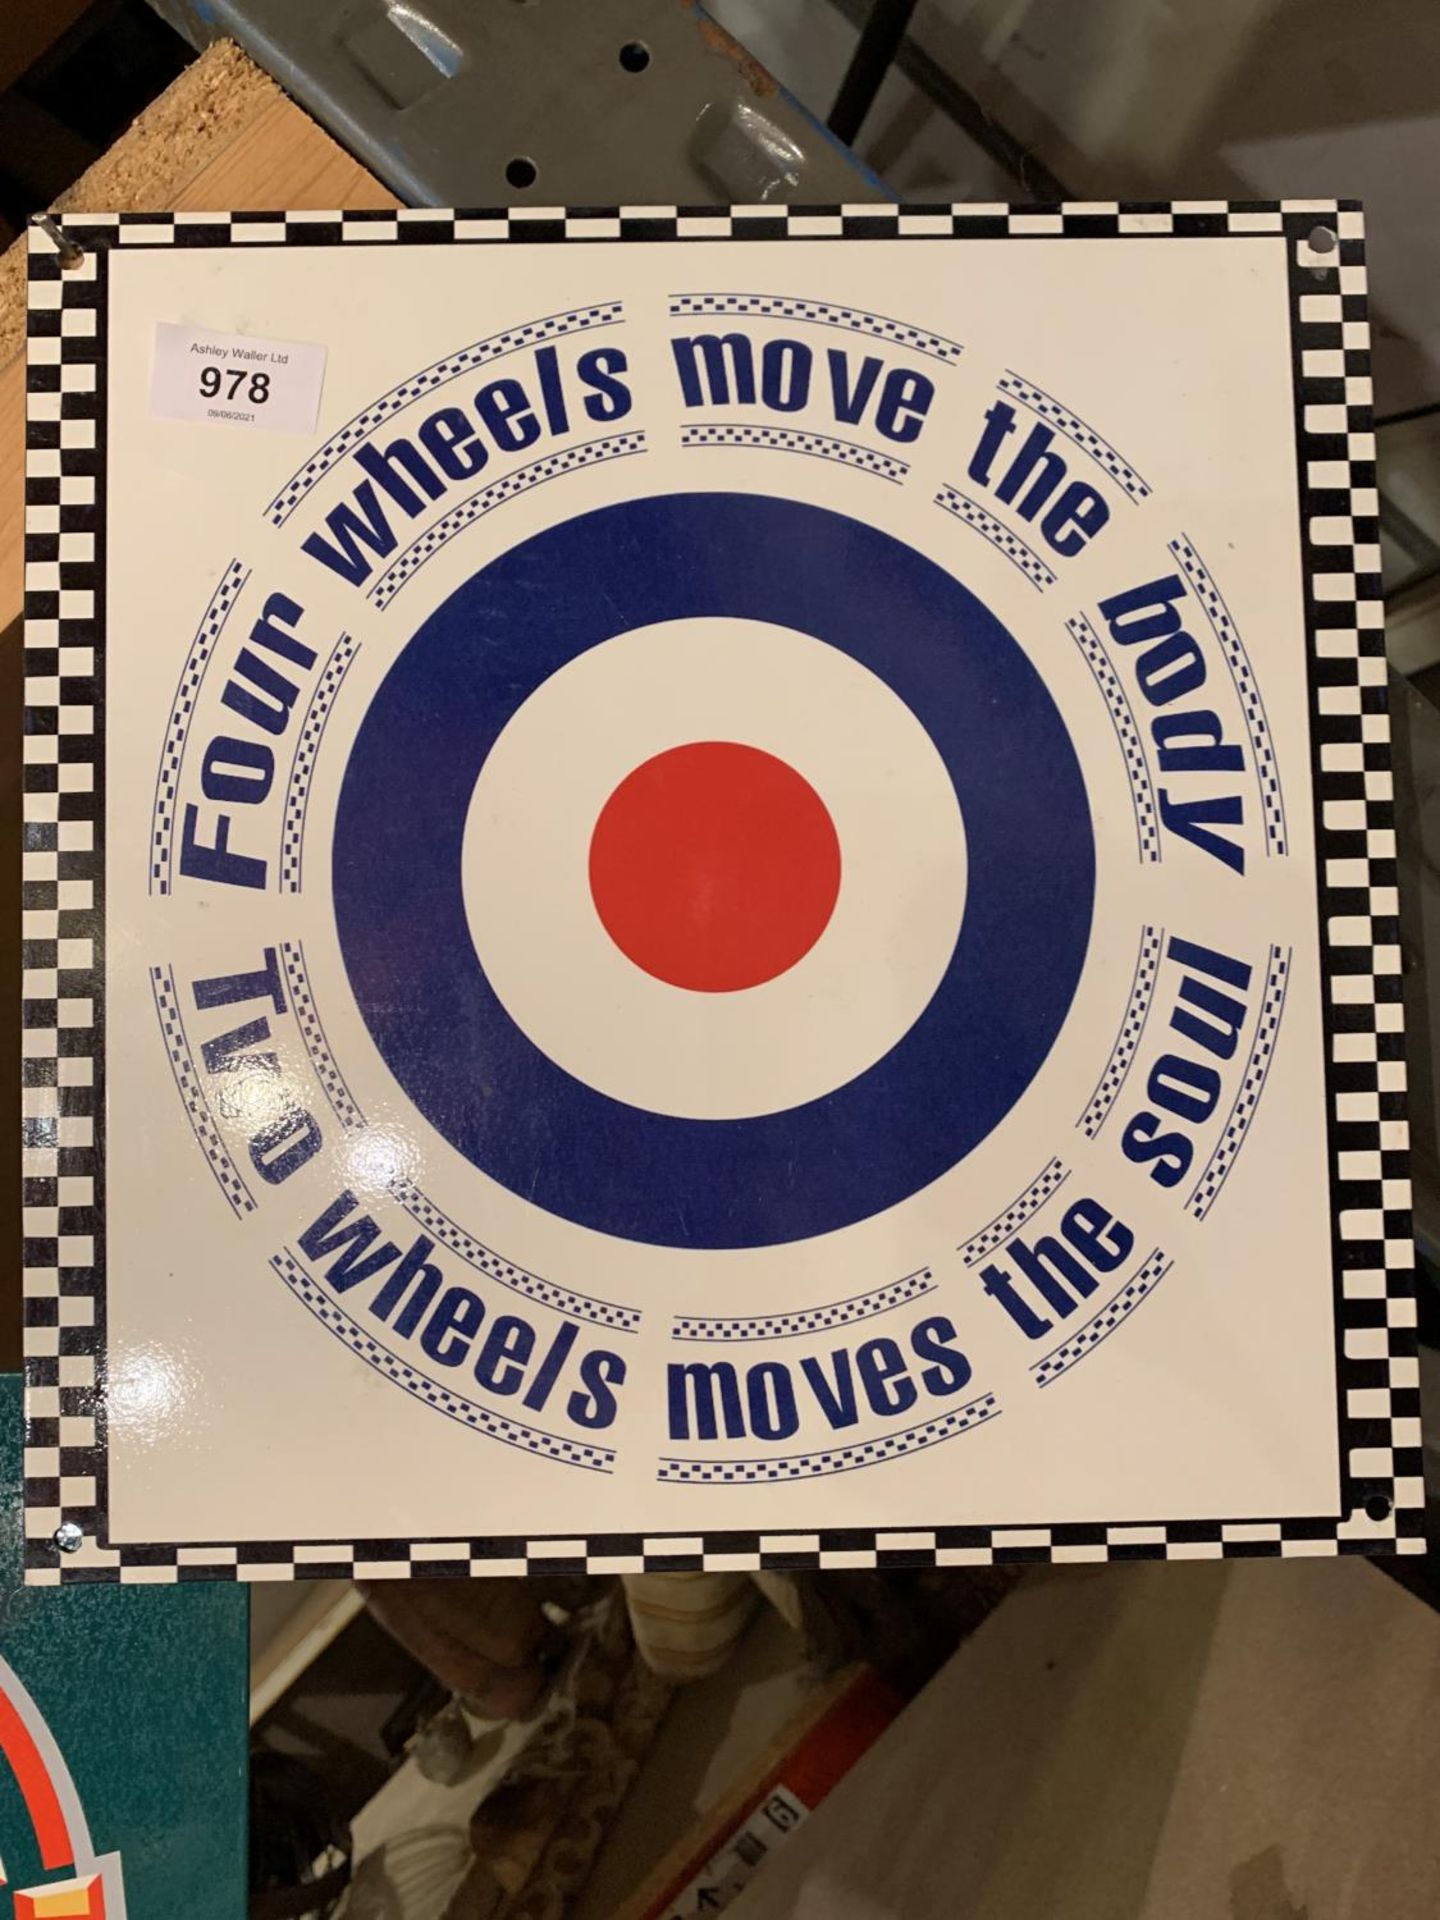 A FOUR WHEELS MOVE THE BODY, TWO WHEELS MOVES THE SOUL METAL TARGET SIGN